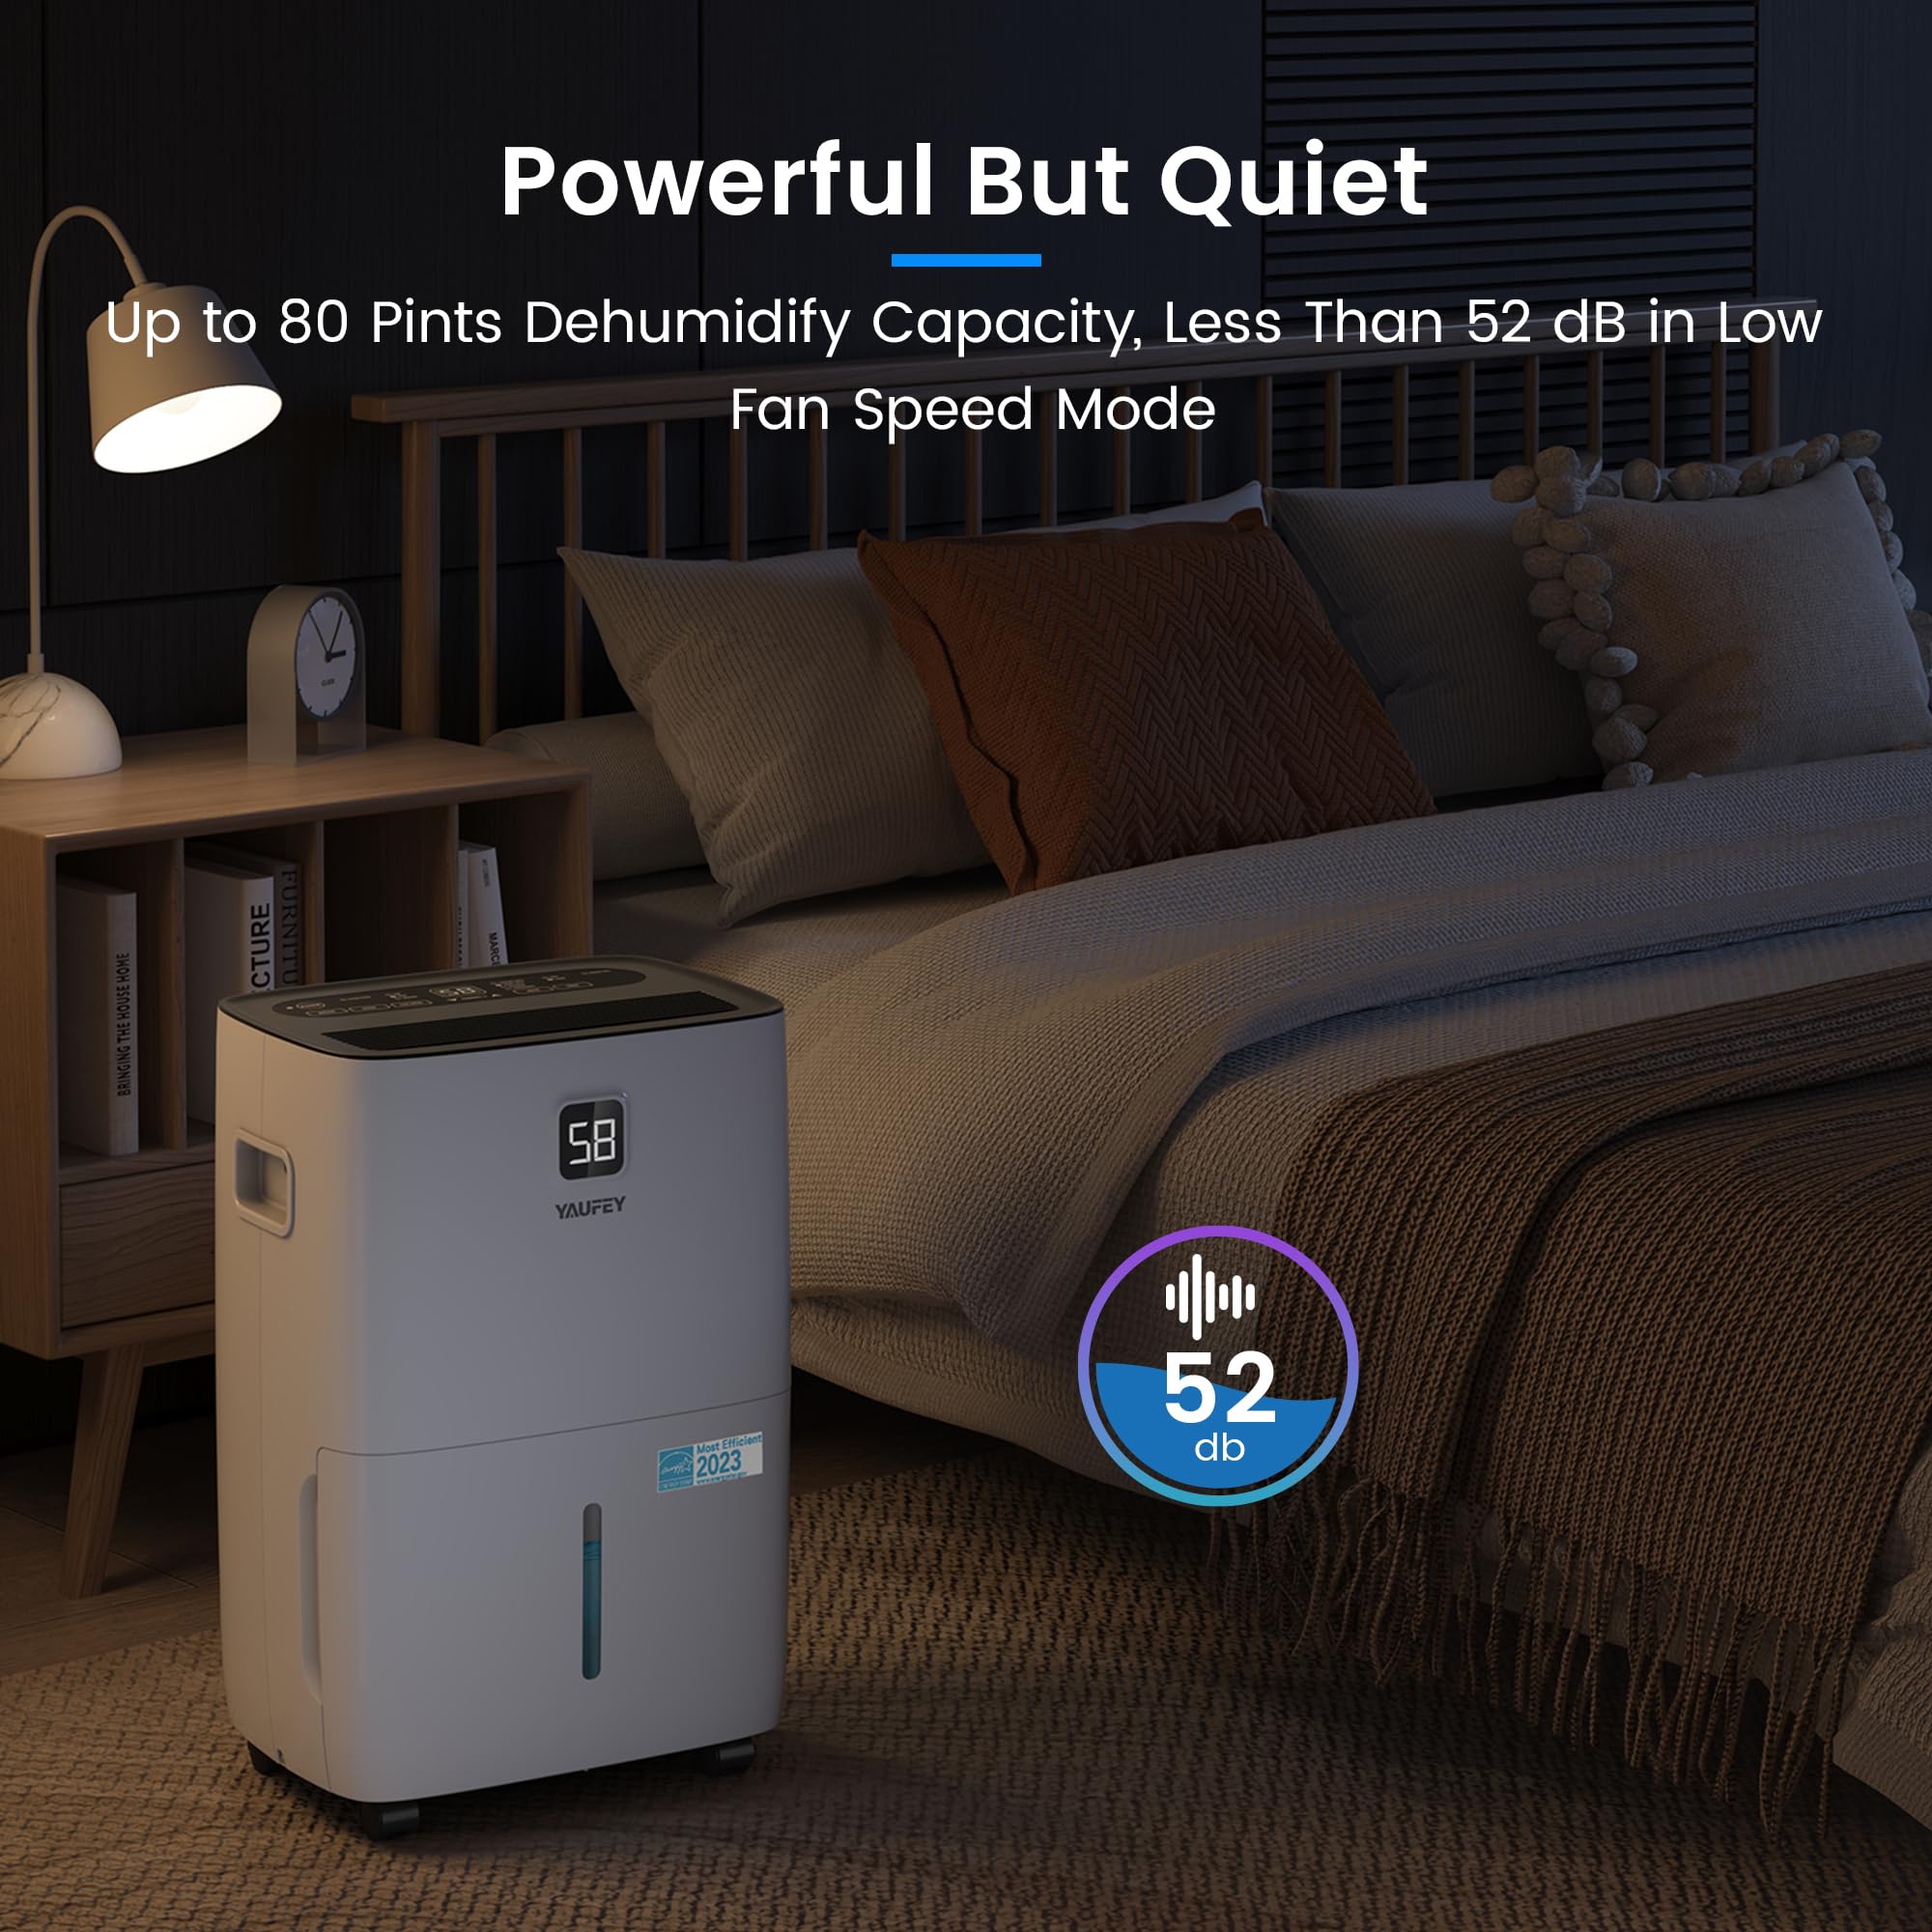 Yaufey 80-Pint Energy Star Dehumidifier for Home, Basement and Large Rooms up to 6000 Sq. Ft, Powerful and Quiet, with Timer, Intelligent Humidity Control, Drain Hose and Large Water Tank